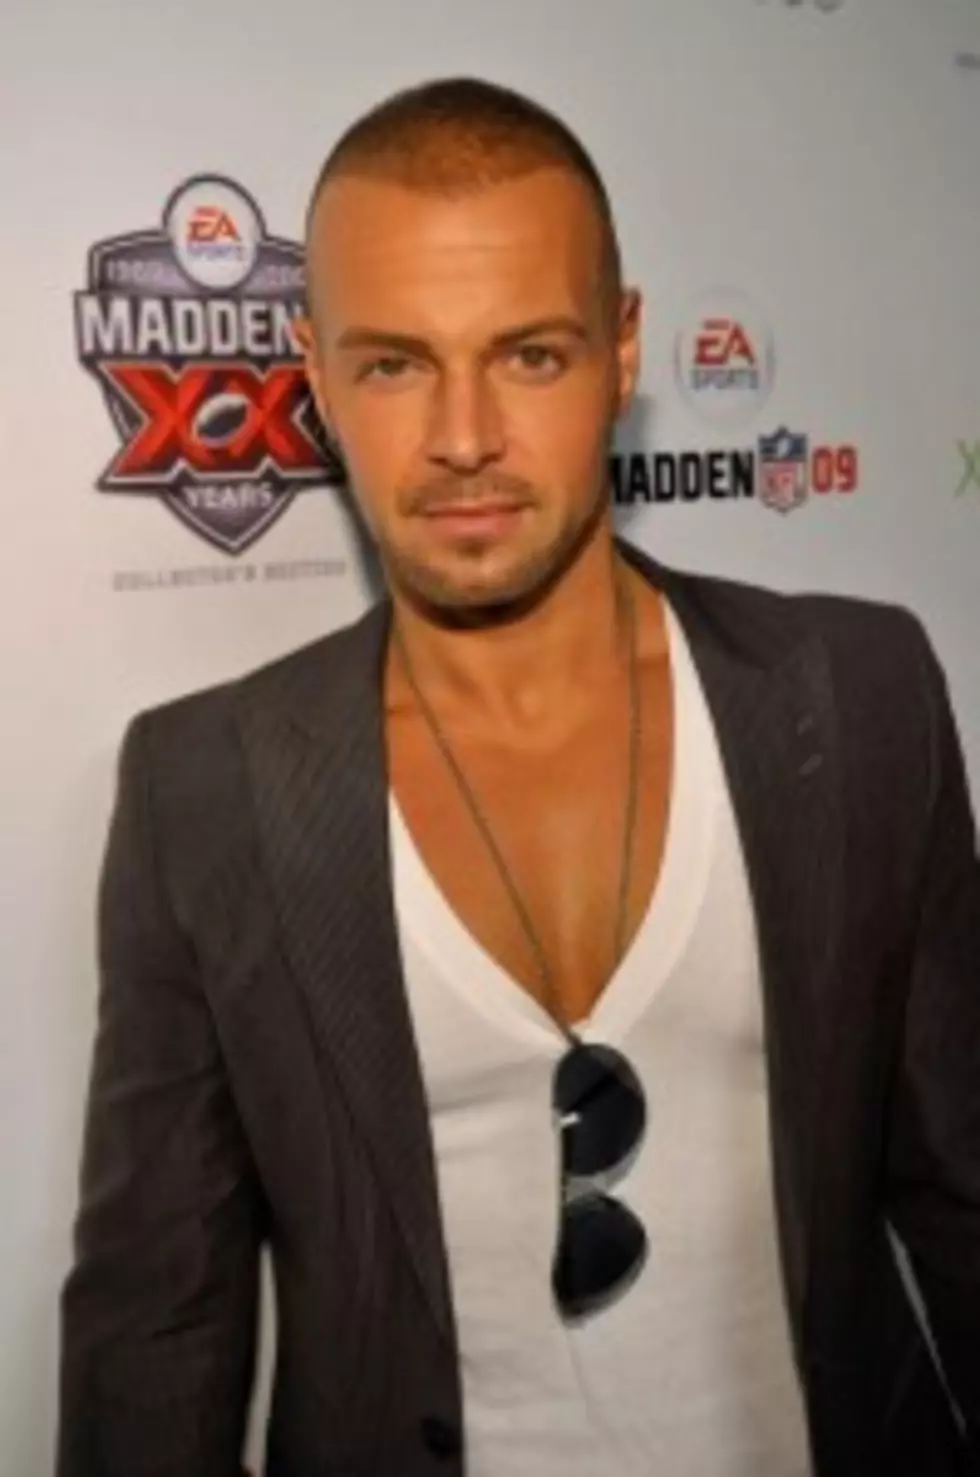 Whoa! Joey Lawrence Joining Chippendales In Las Vegas